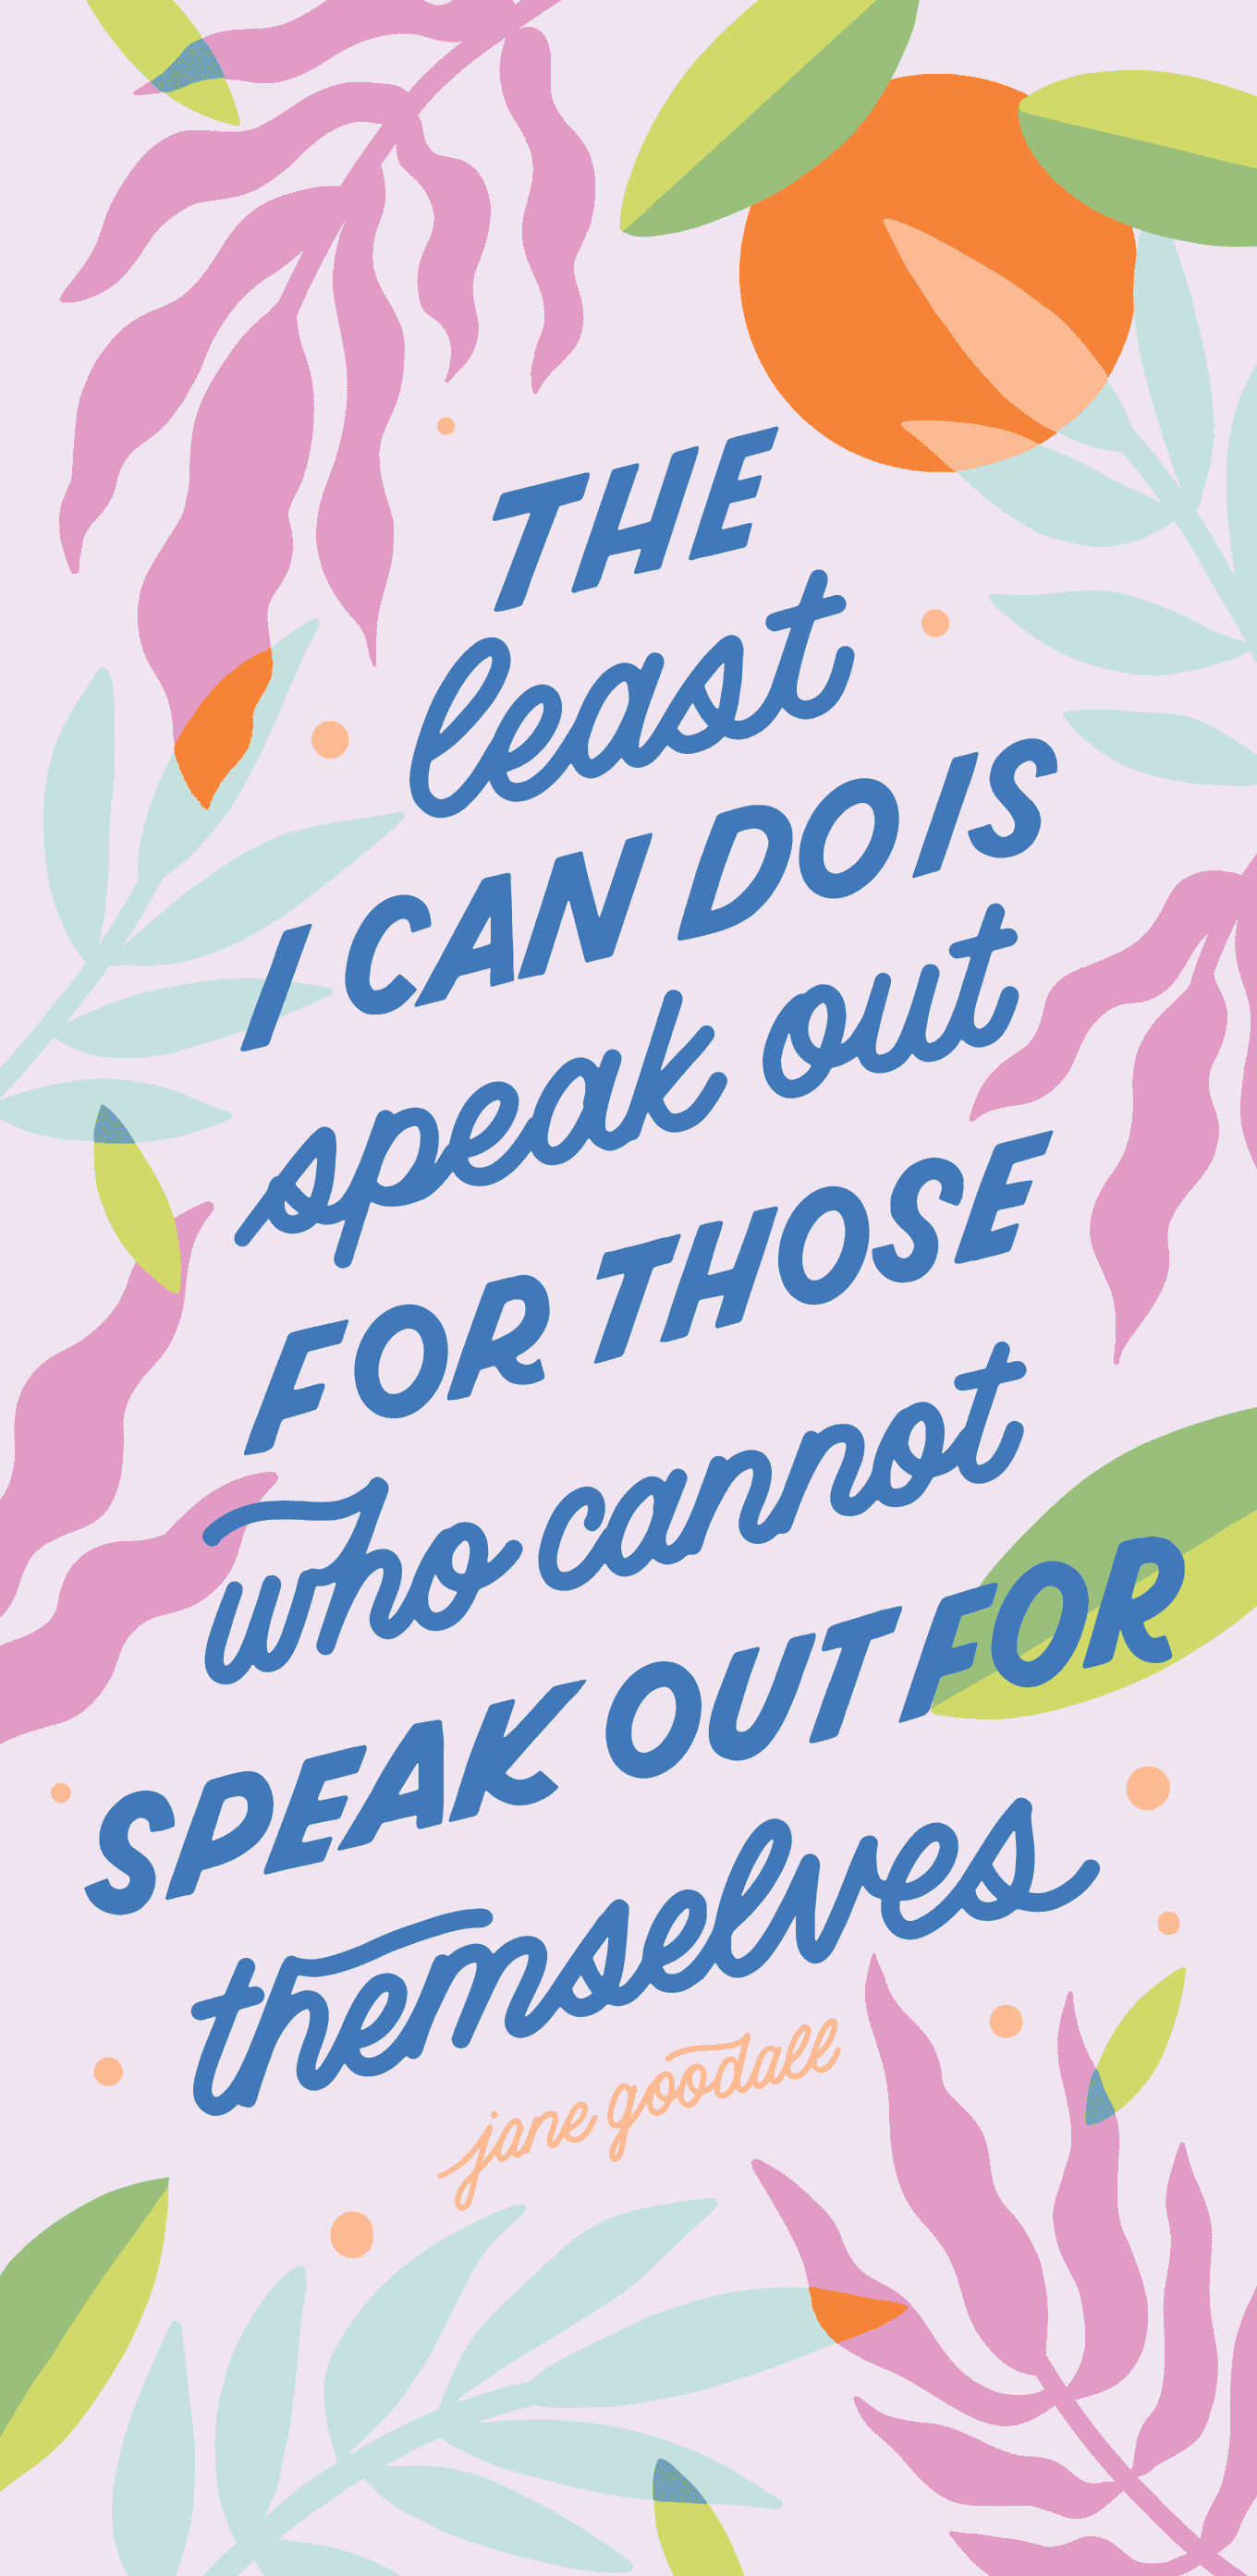 Quote poster wallpaper: 